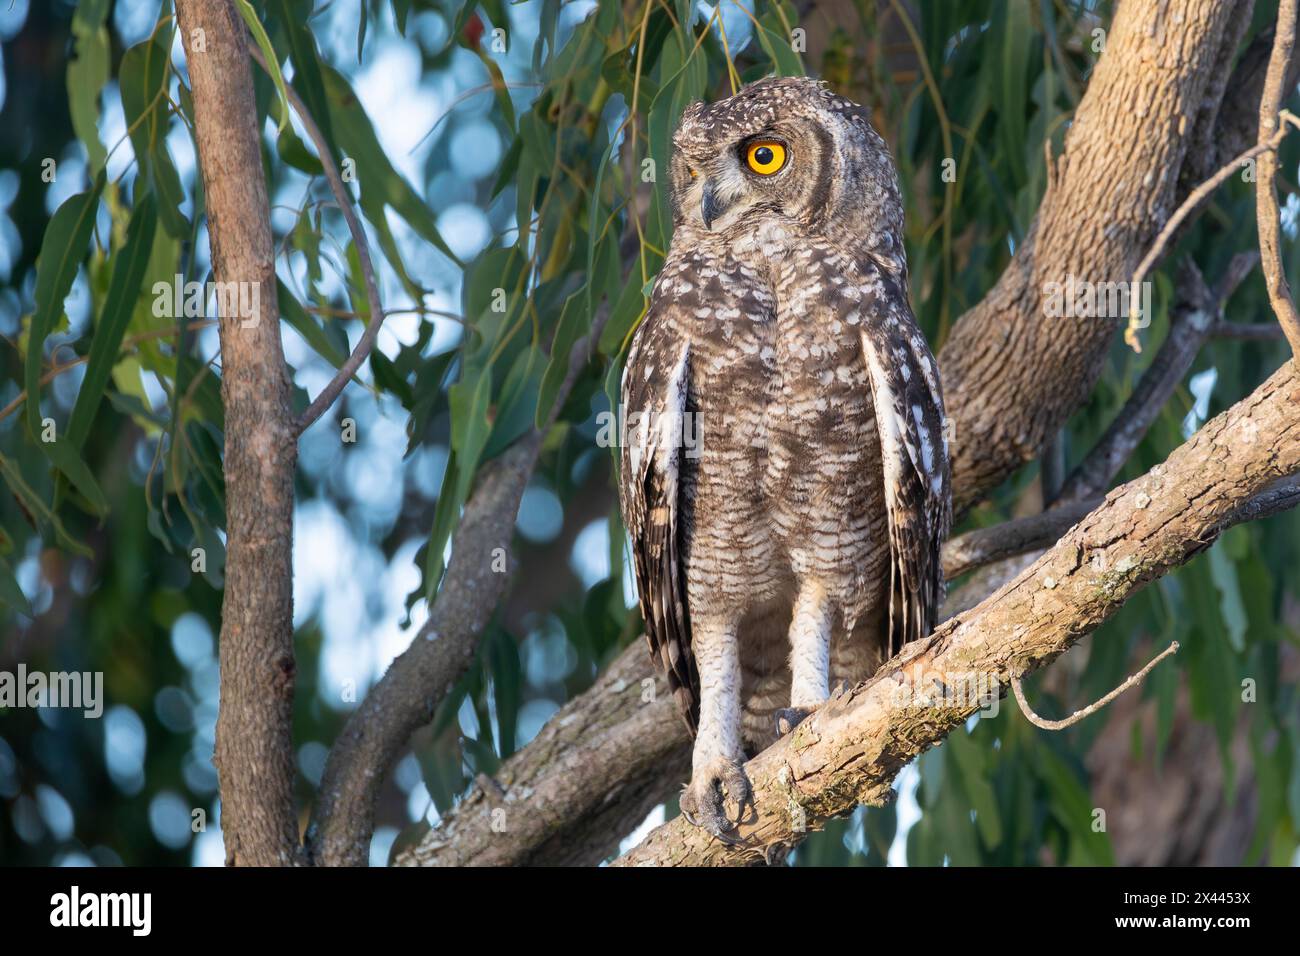 Juvenile Spotted Eagle-Owl (Bubo africanus), African Spotted Eagle-Owl, Velddrif, West Coast, South Africa at sunset perched in Eucalyptus tree Stock Photo